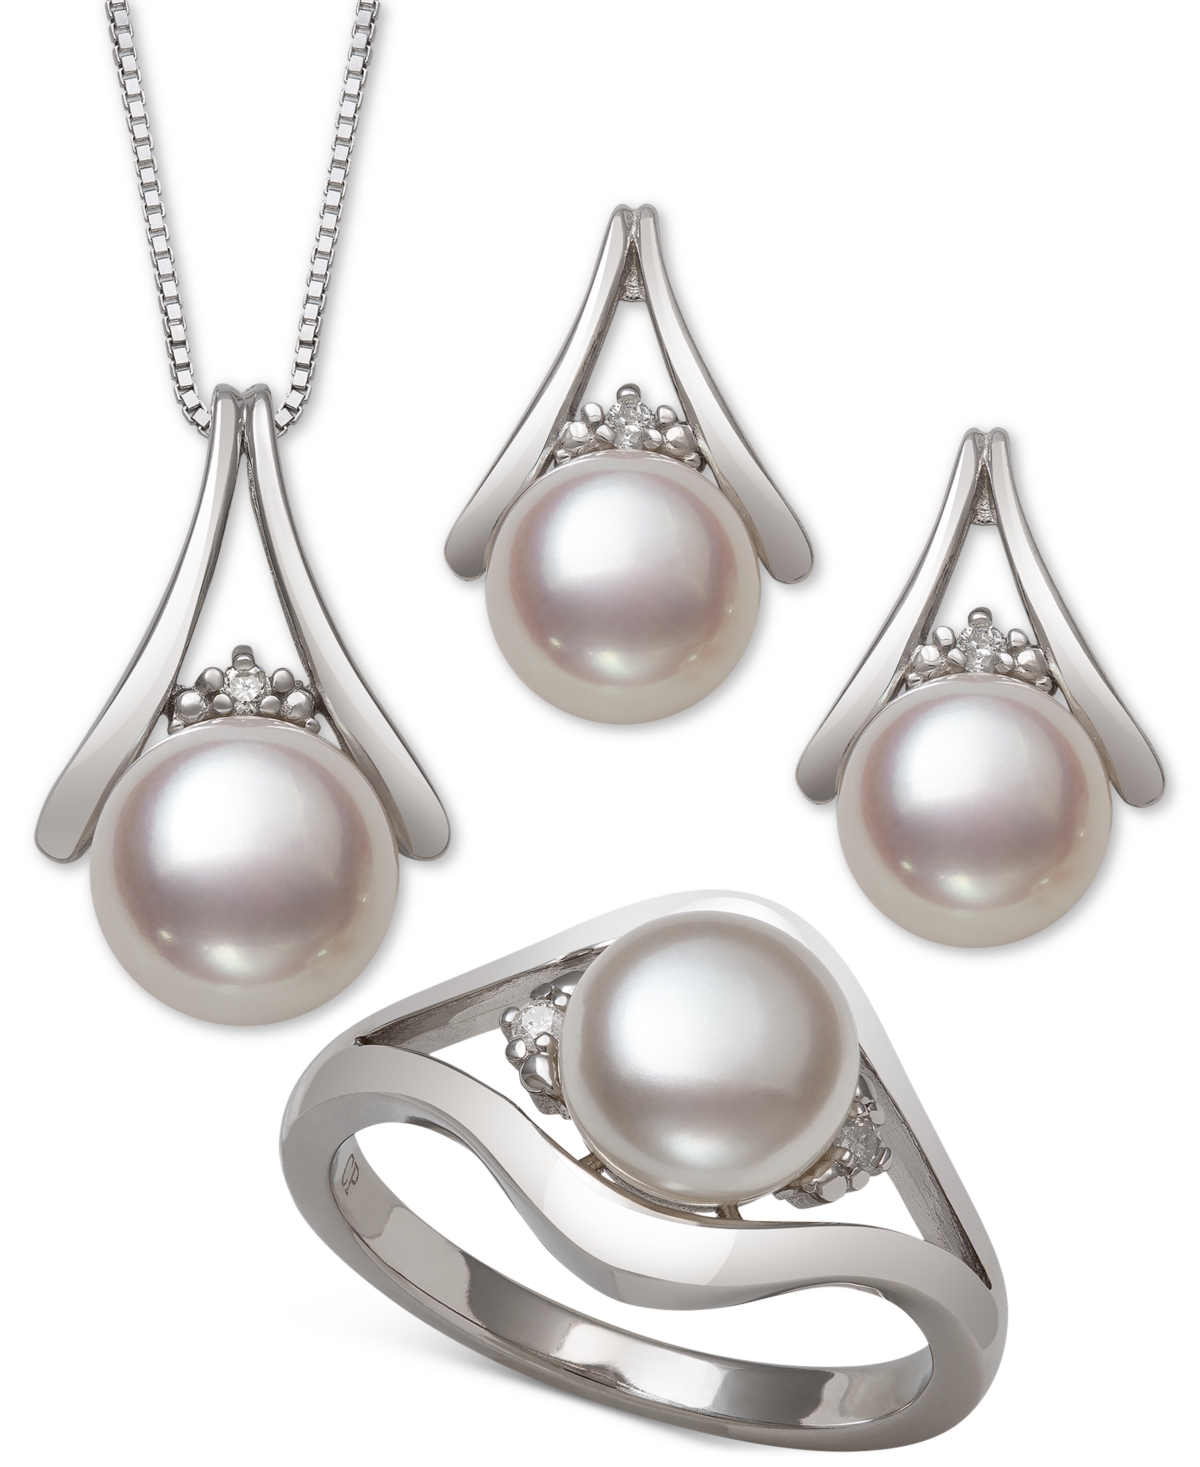 3-Pc. Set Cultured Freshwater Pearl (7 & 8mm) Pendant Necklace, Stud Earrings & Ring in Sterling Silver - Silver